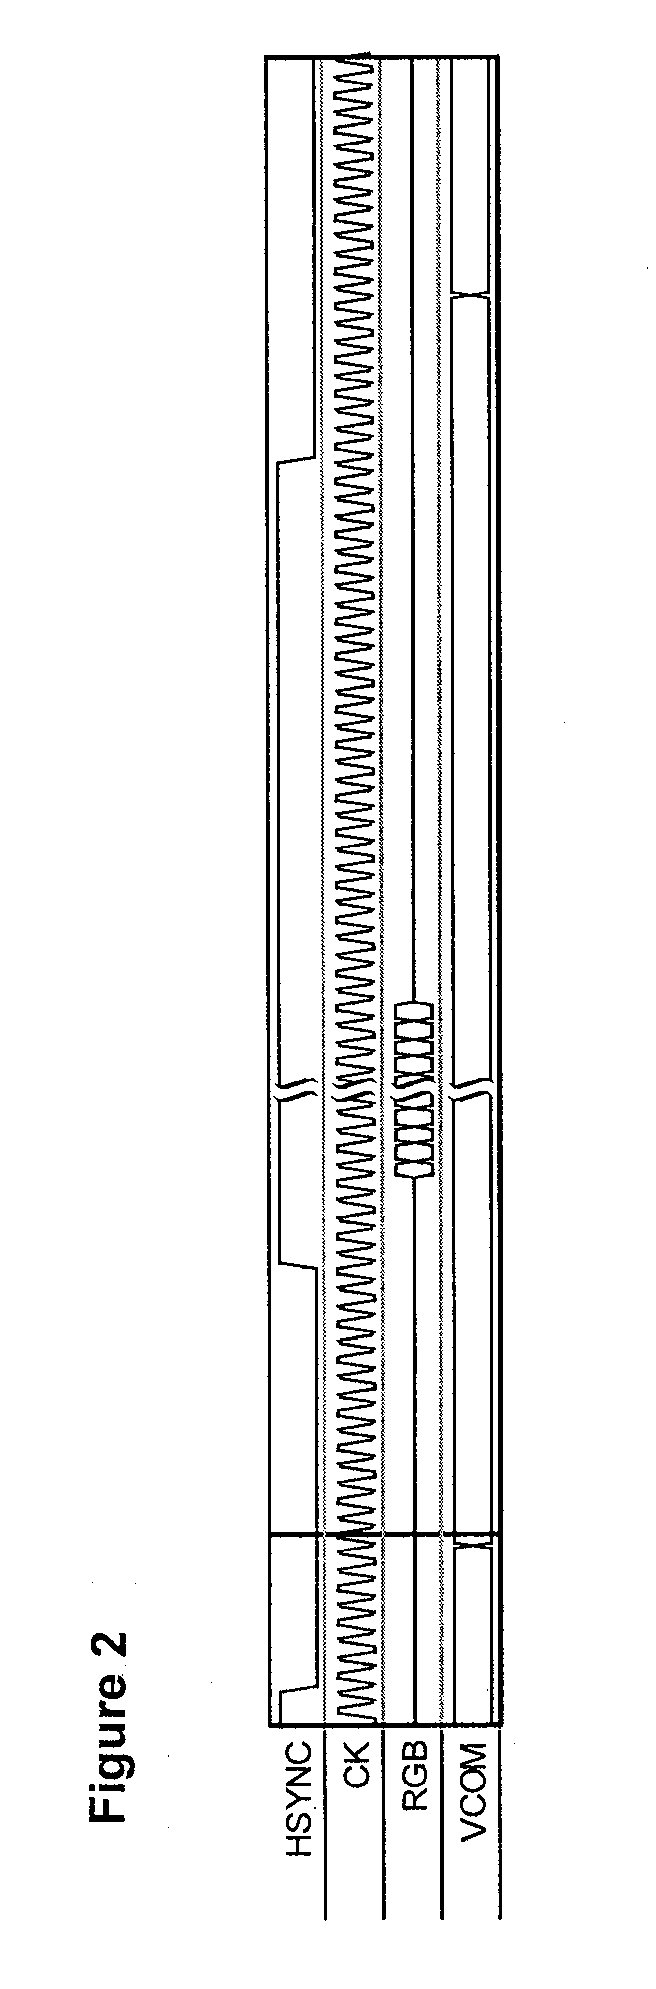 Apparatus and method for preventing charge pumping in series connected diode stacks